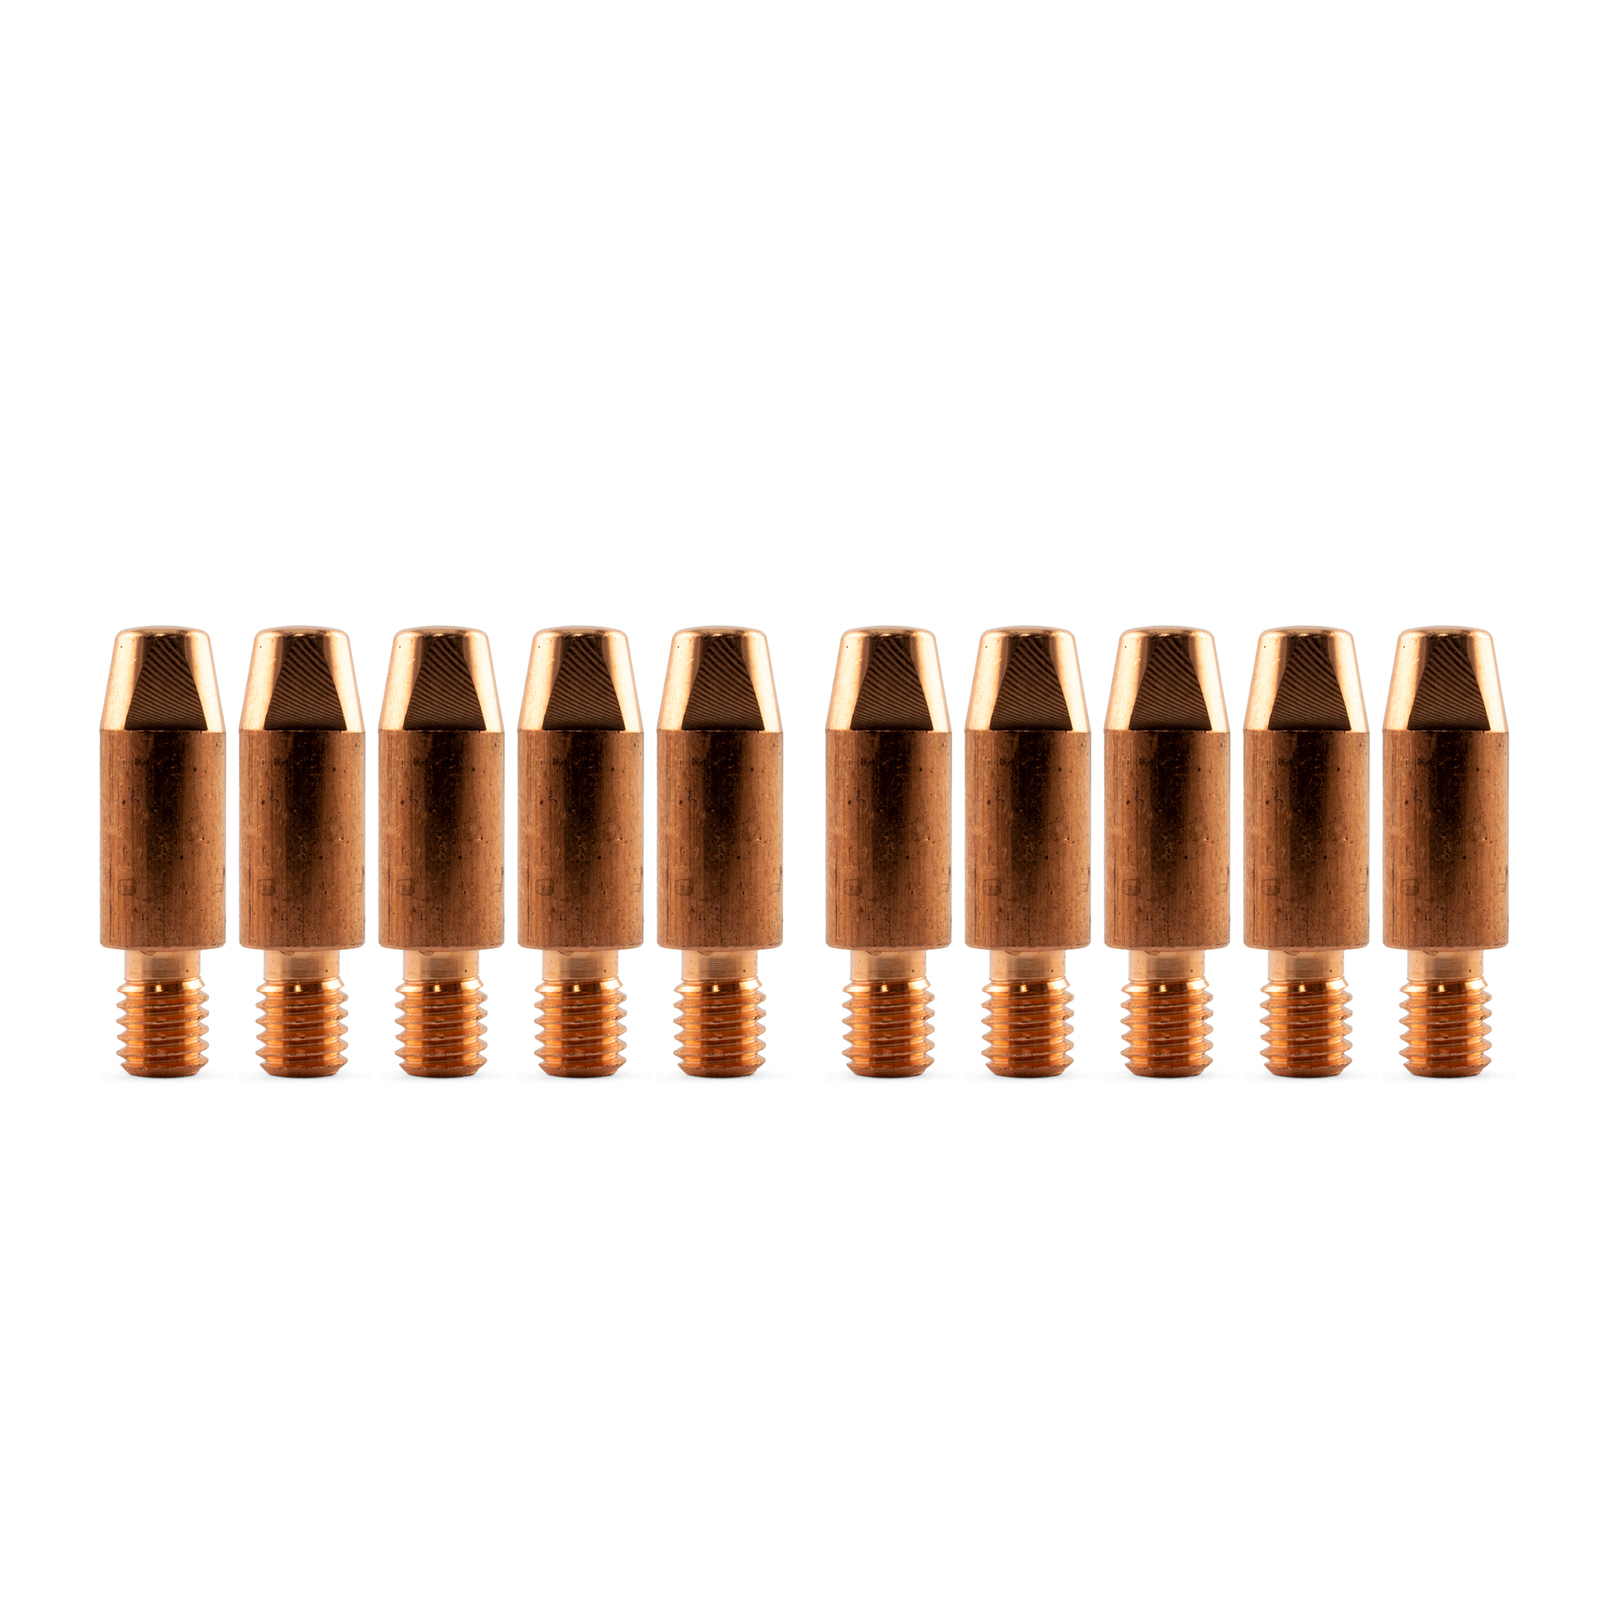 Binzel Style MIG Contact Tips for ALUMINIUM 0.9mm - 10 pack - M6 x 8mm x 0.9mm